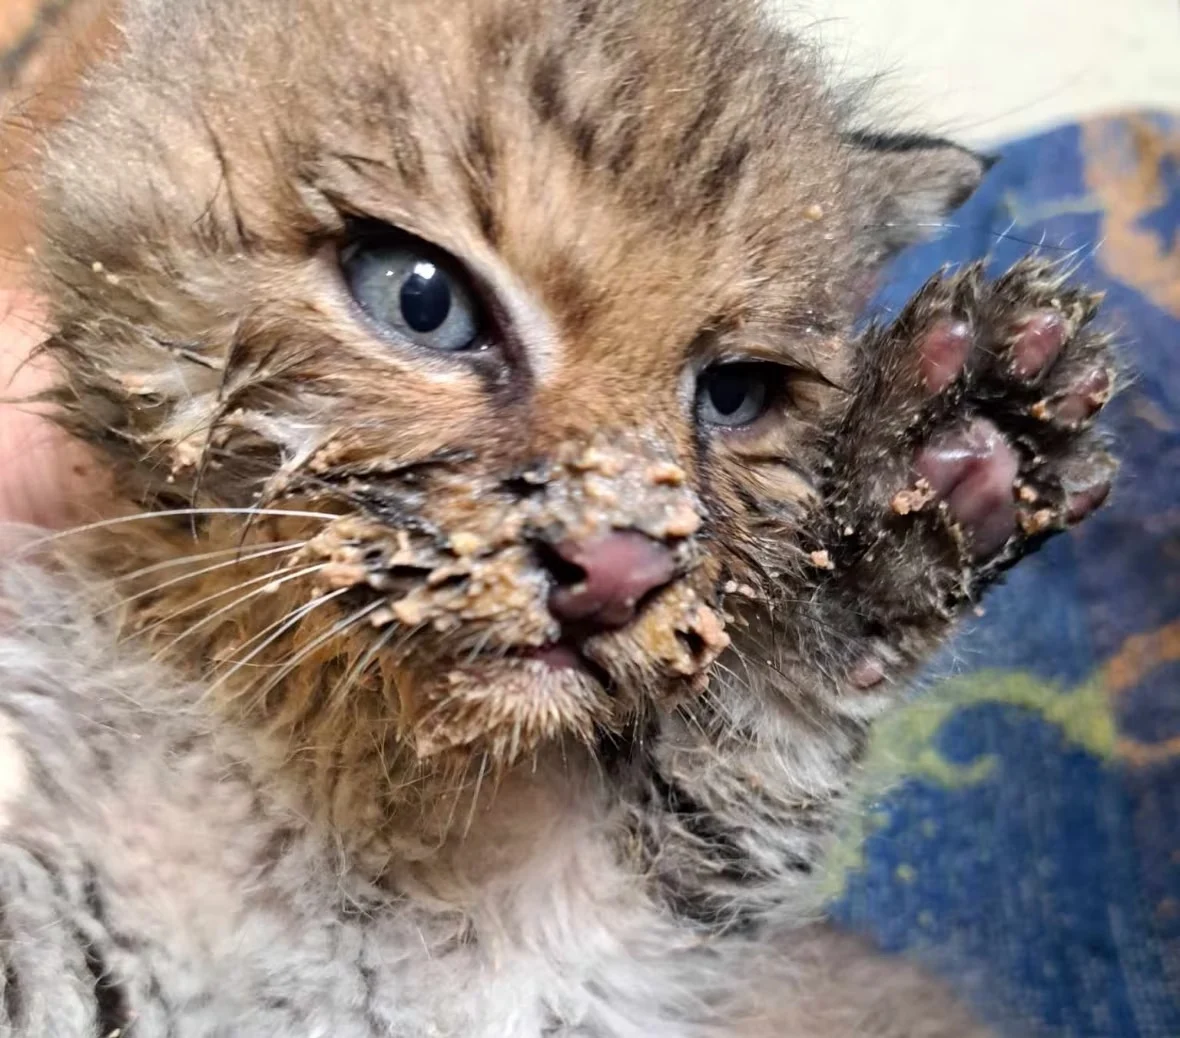 bobcat-kitten-lee/Submitted by Pam Novak via CBC